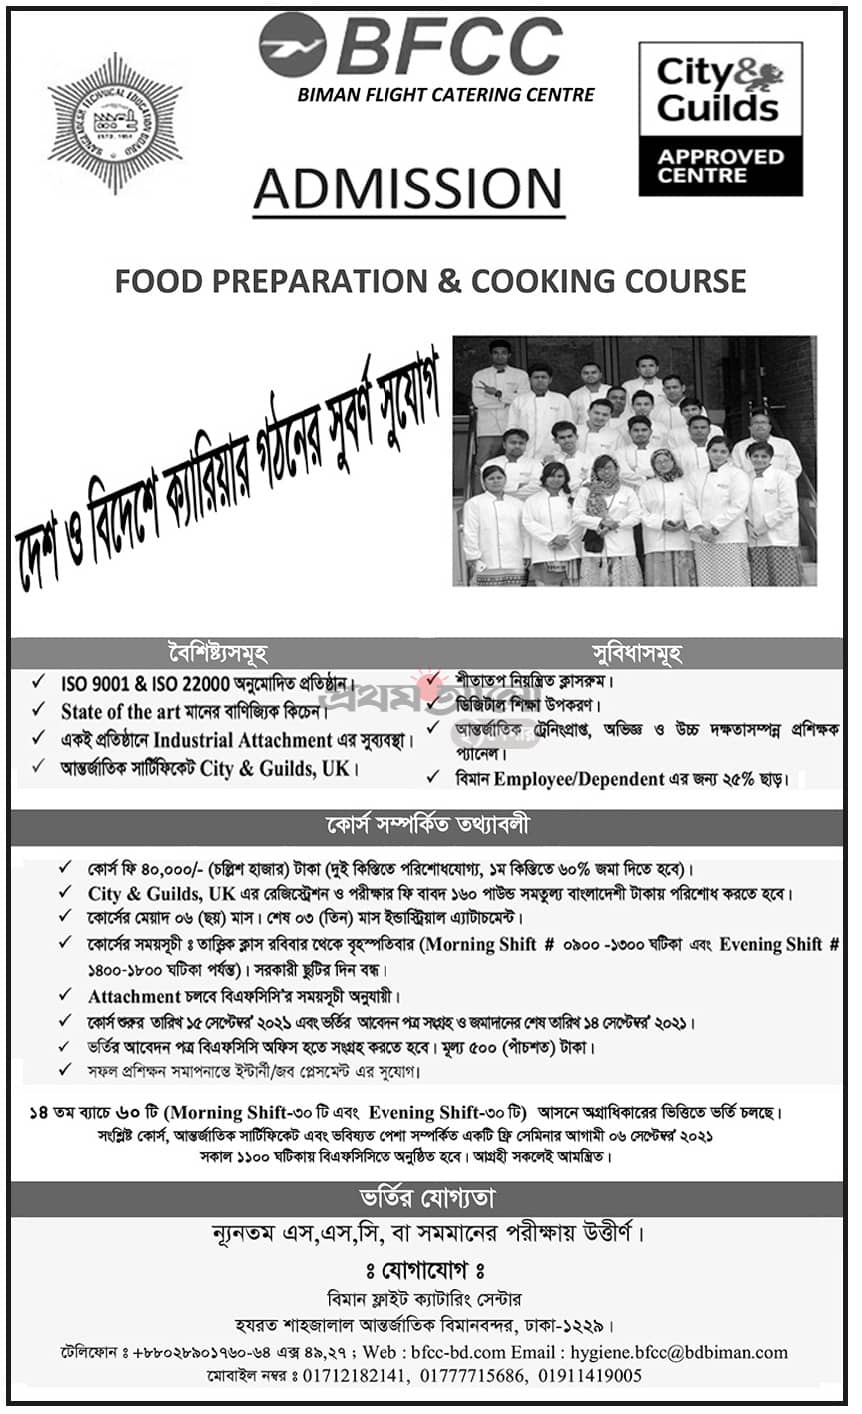 Hotel Management Course in Food Preparation and Cooking